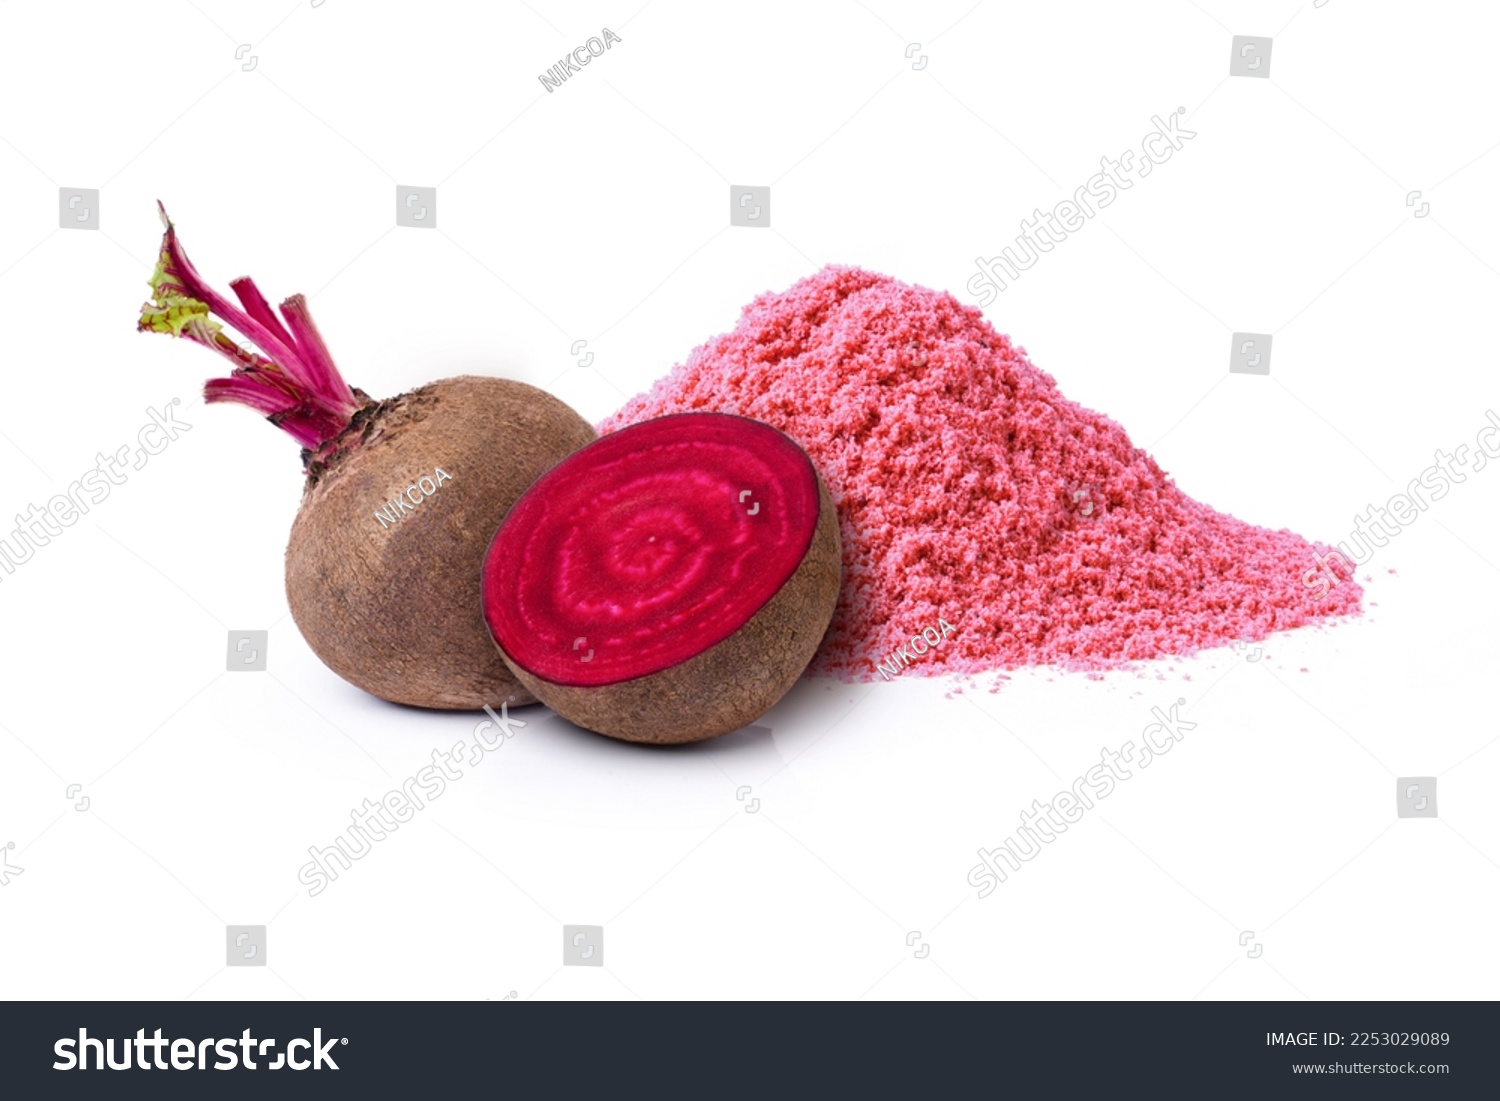 Beetroot (beet root) powder with fresh fruit isolated on white background. #2253029089